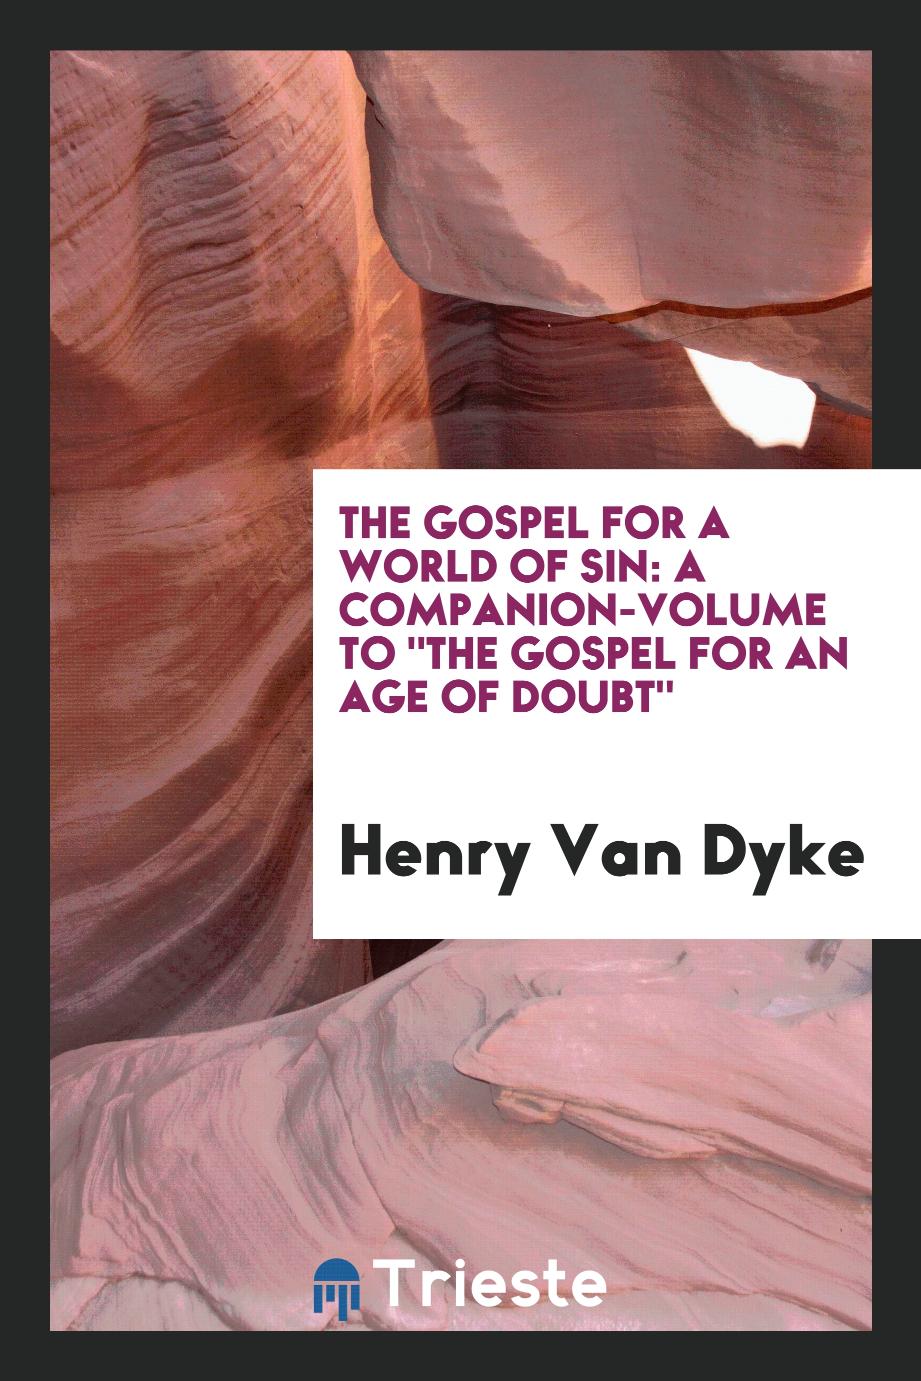 The Gospel for a World of Sin: A Companion-Volume to "The Gospel for an Age of Doubt"